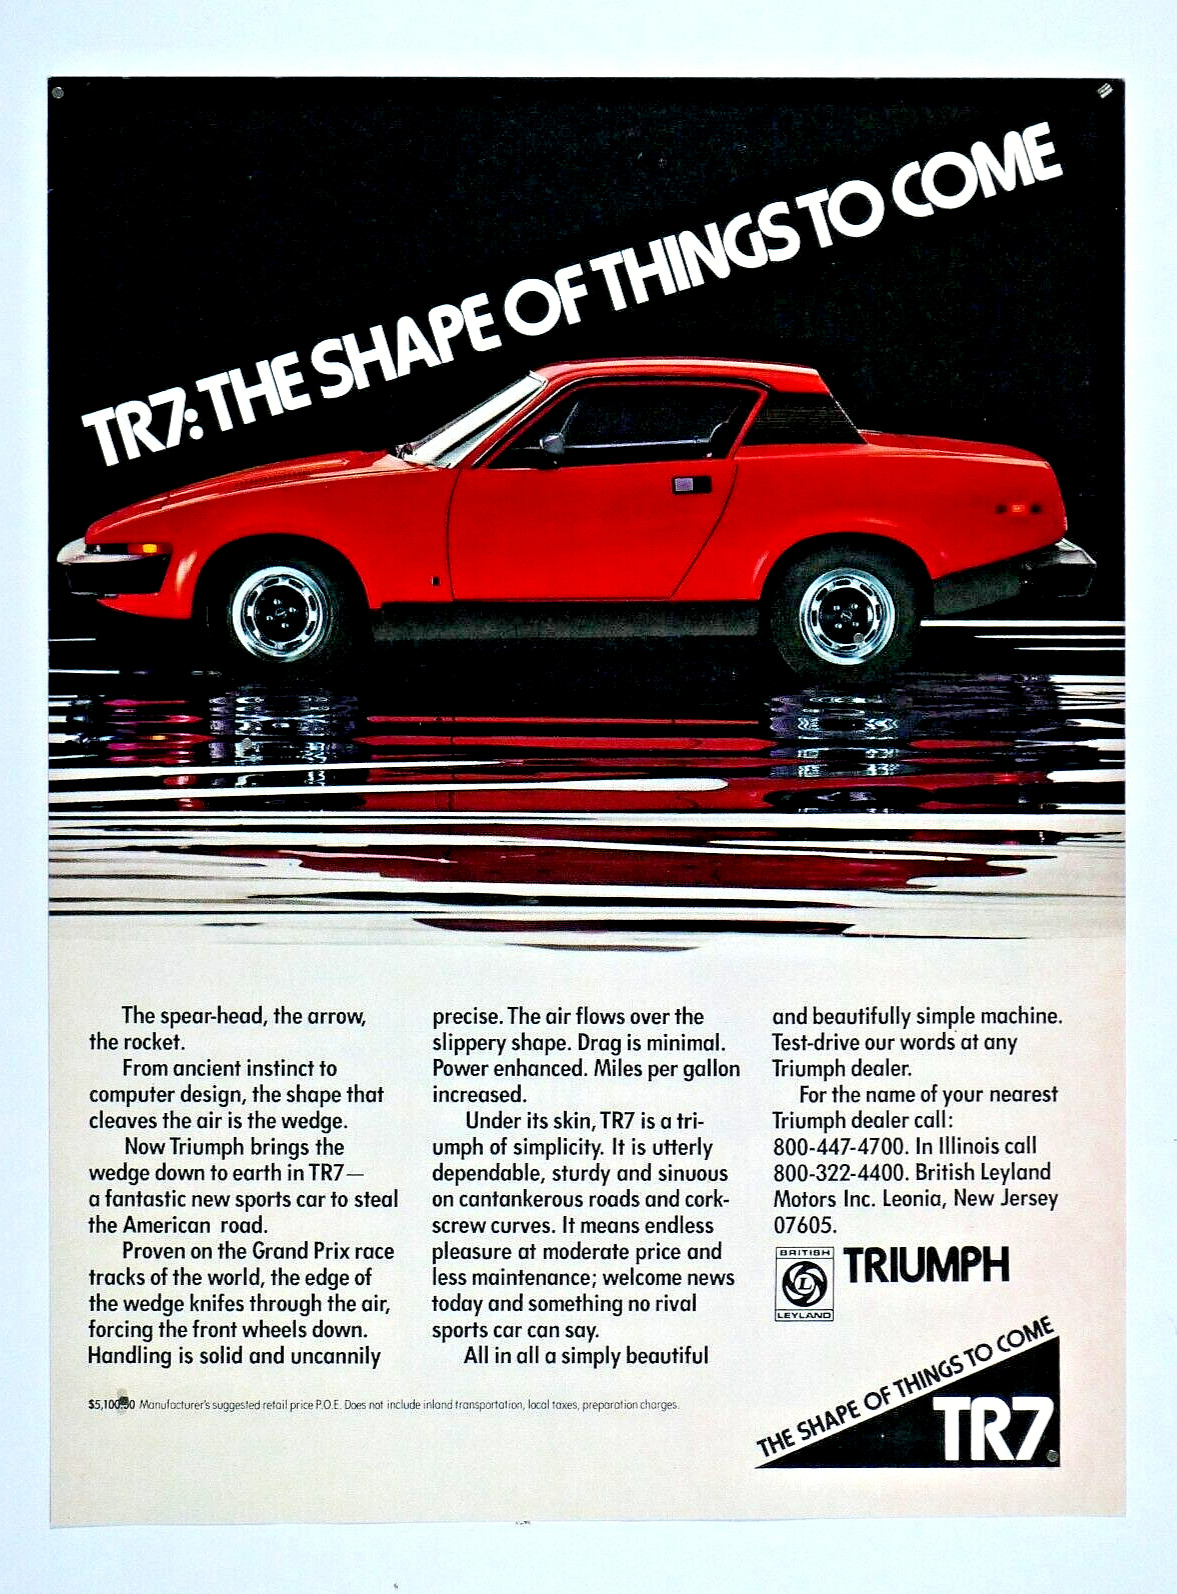 1975 Triumph TR 7 Vintage The Shape Of Things To Come Red Original Print Ad